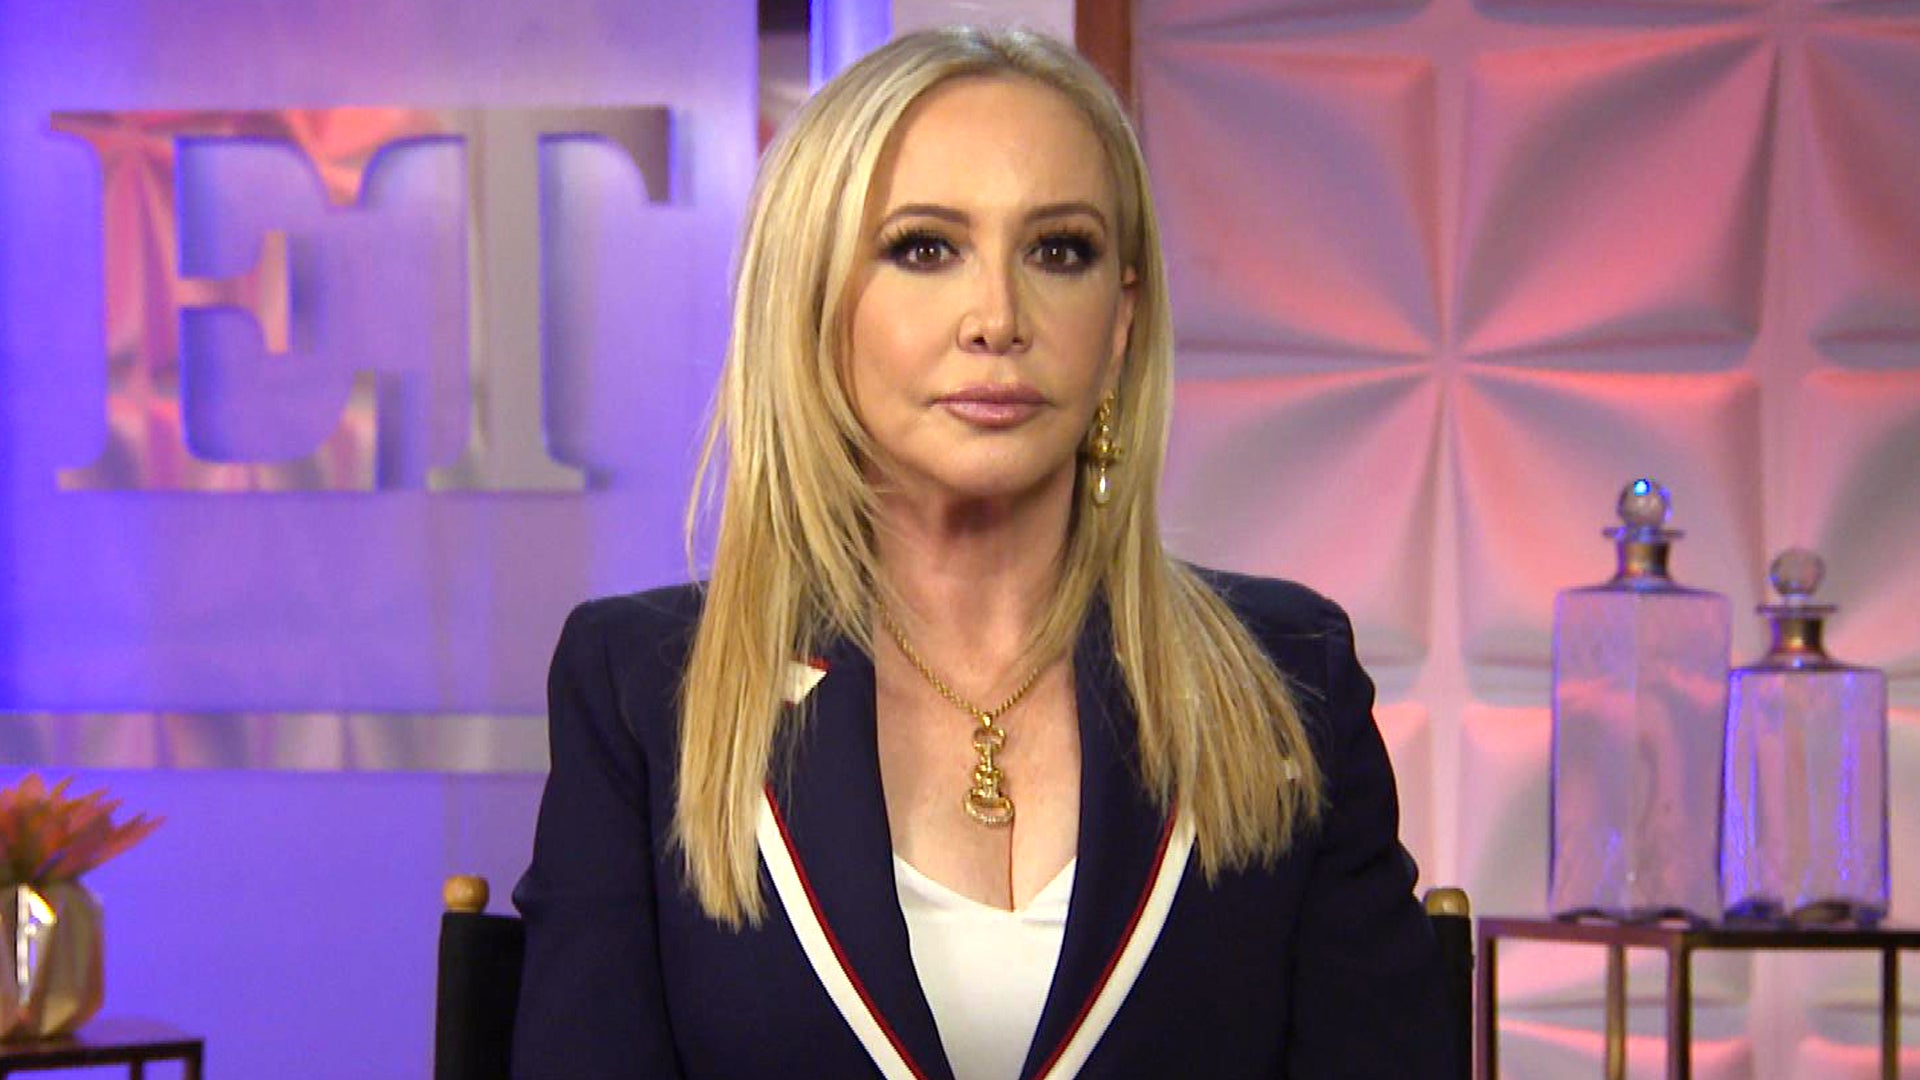 Shannon Beador 'Apologetic and Remorseful' Following DUI Hit and Run